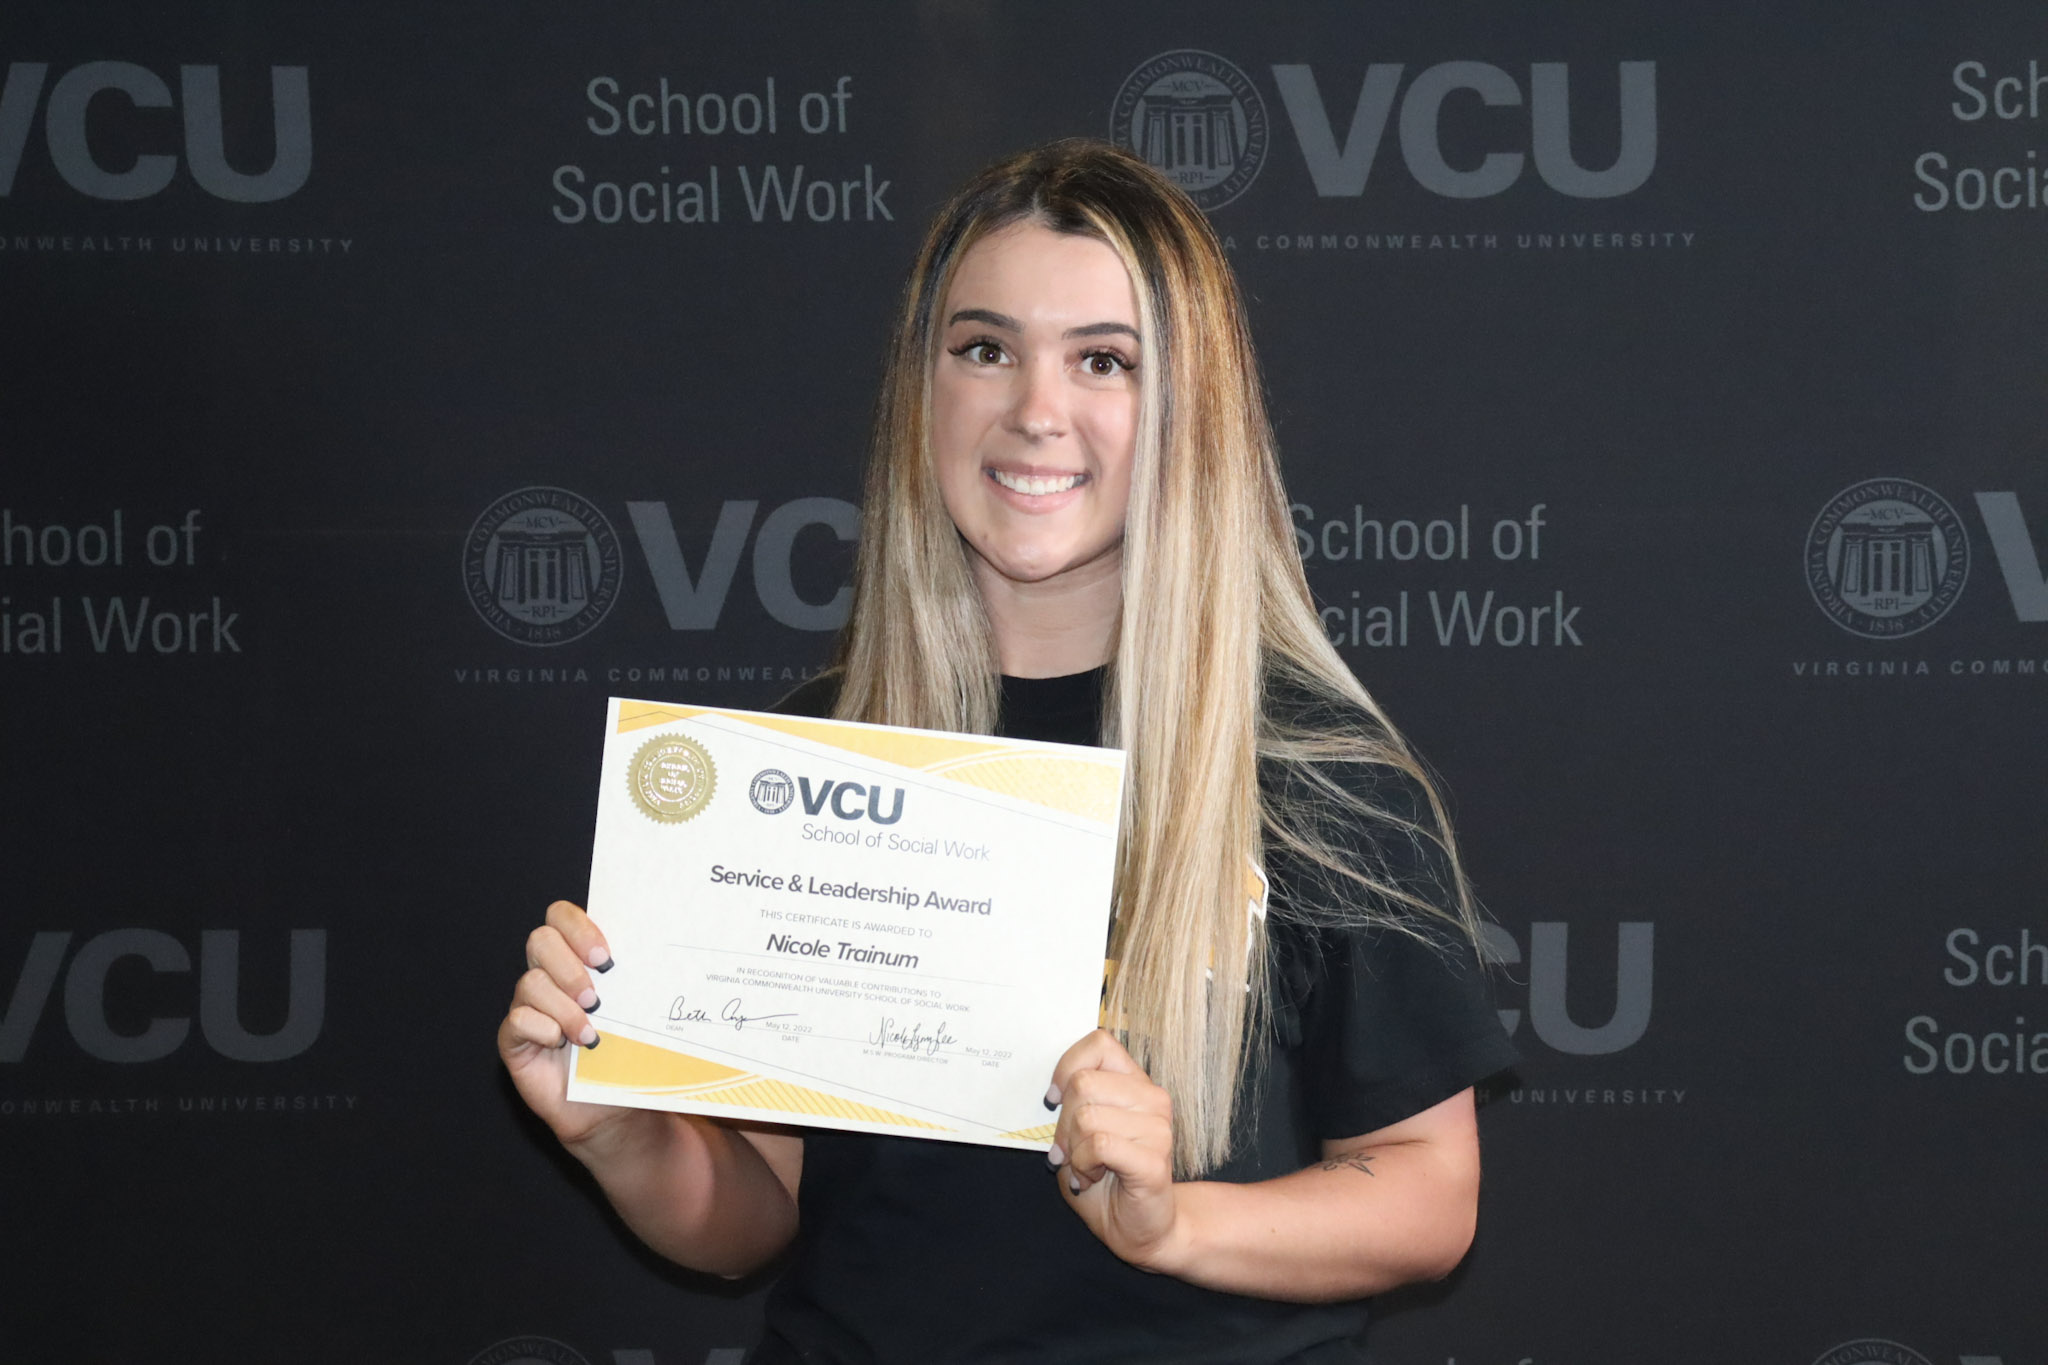 A student poses with awards certificate in front of VCU School of Social Work backdrop